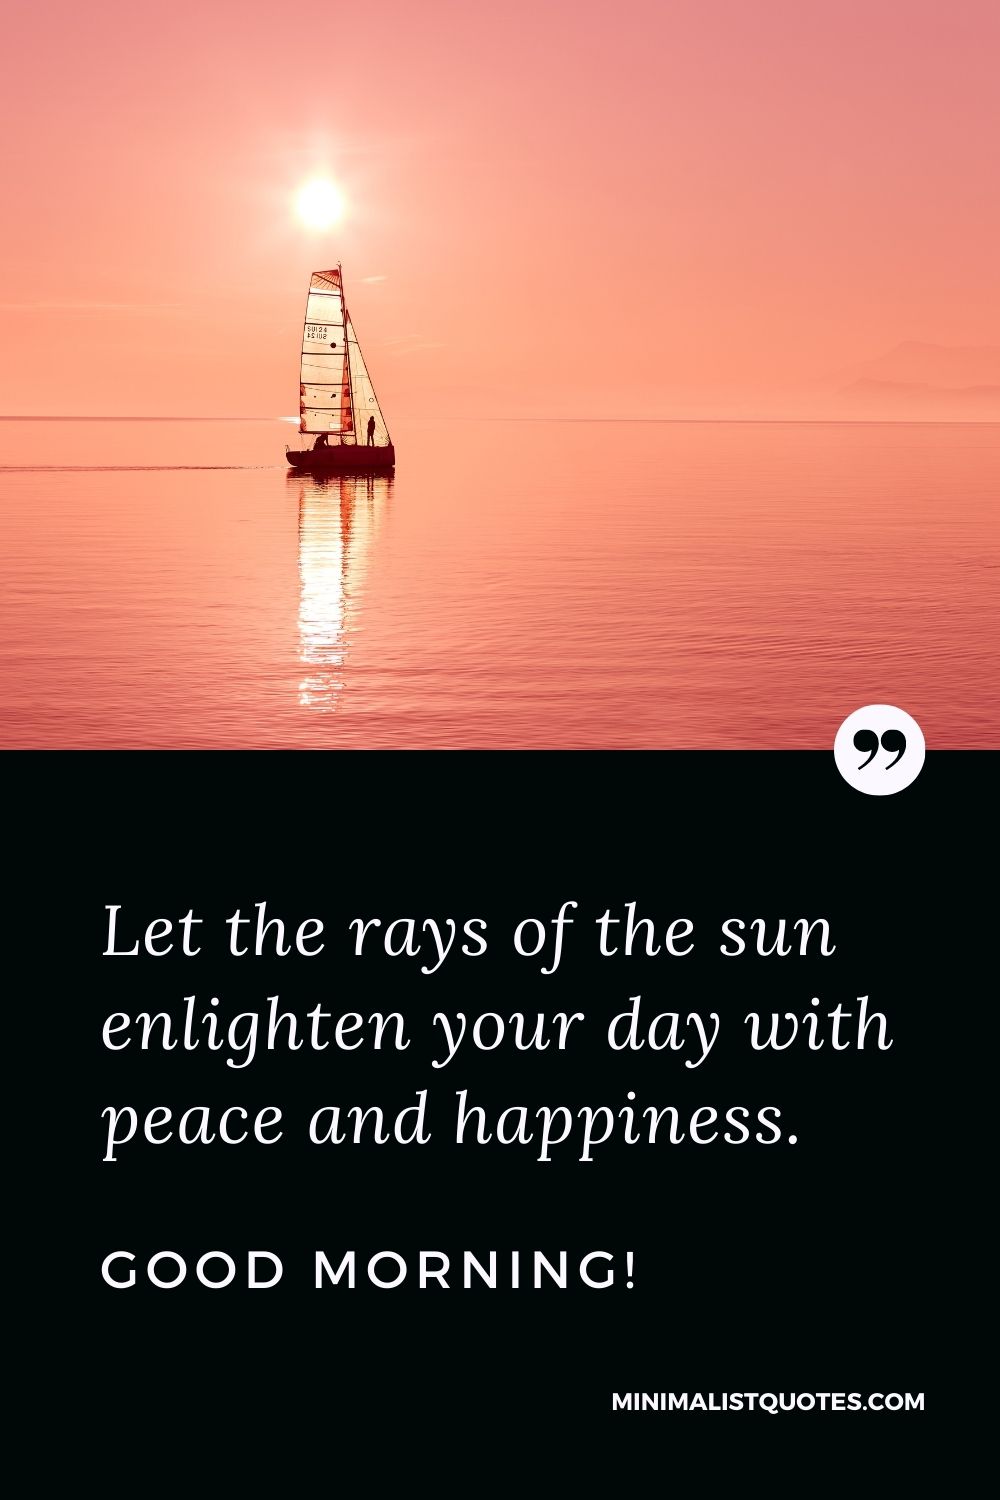 Morning Quote, Wish & Message With Image: Let the rays of the sun enlighten your day with peace and happiness. Good Morning!